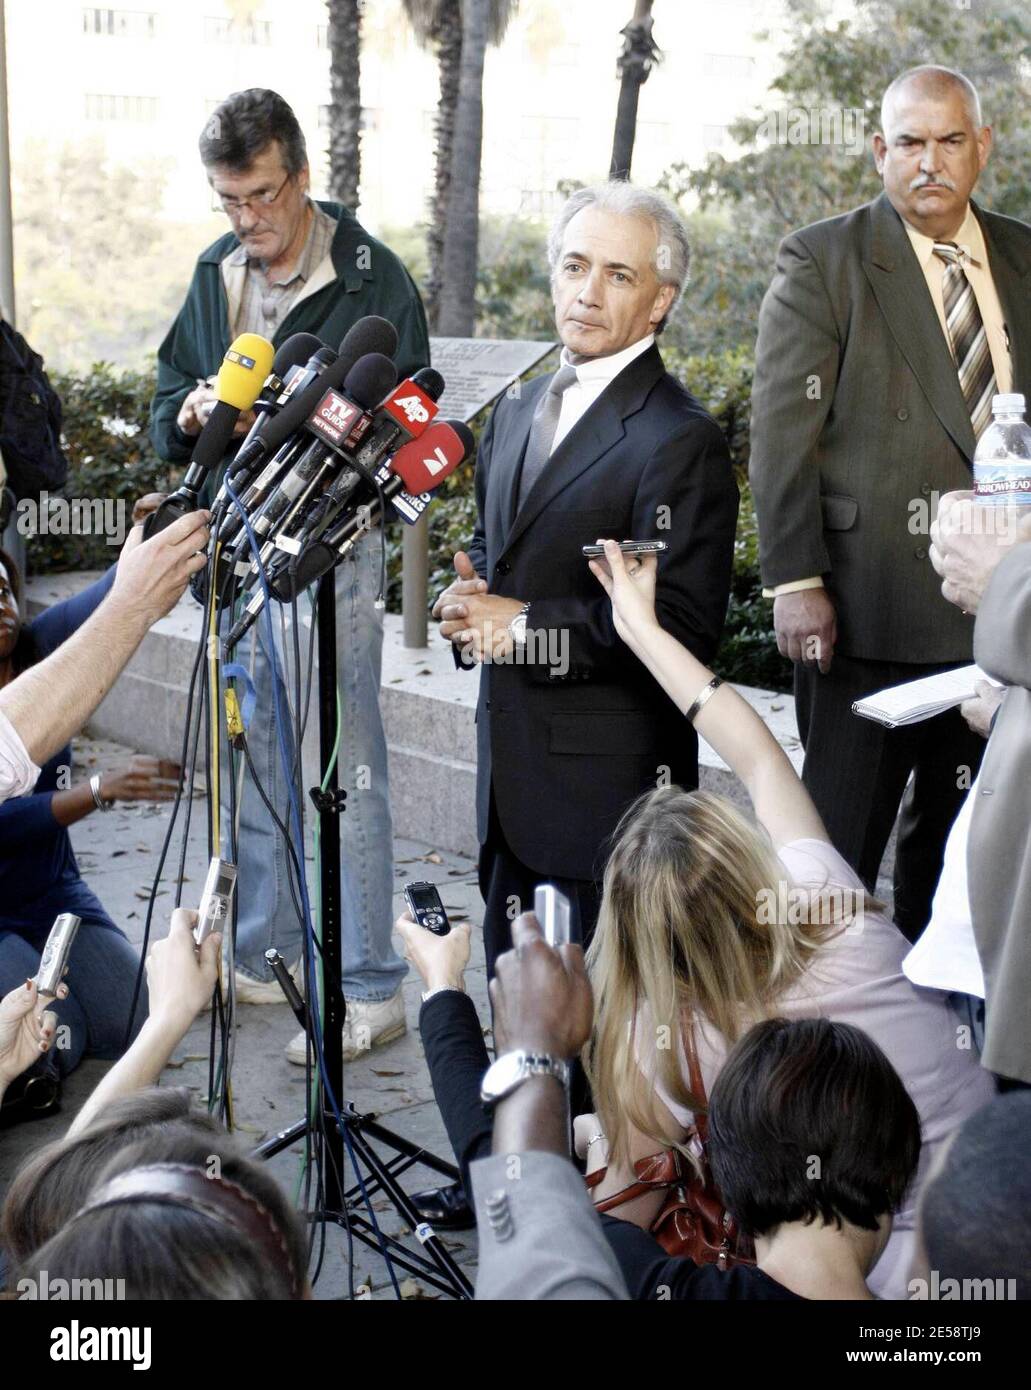 Kevin Federline's attorney Mark Vincent Kaplan spoke to the press shortly after the custody hearing today. He told the media that a written ruling would be made by the court Monday or Tuesday and that the current custody ruling had been extended over the weekend. Los Angeles, Calif. 10/26/07.   [[rac ral laj]] Stock Photo